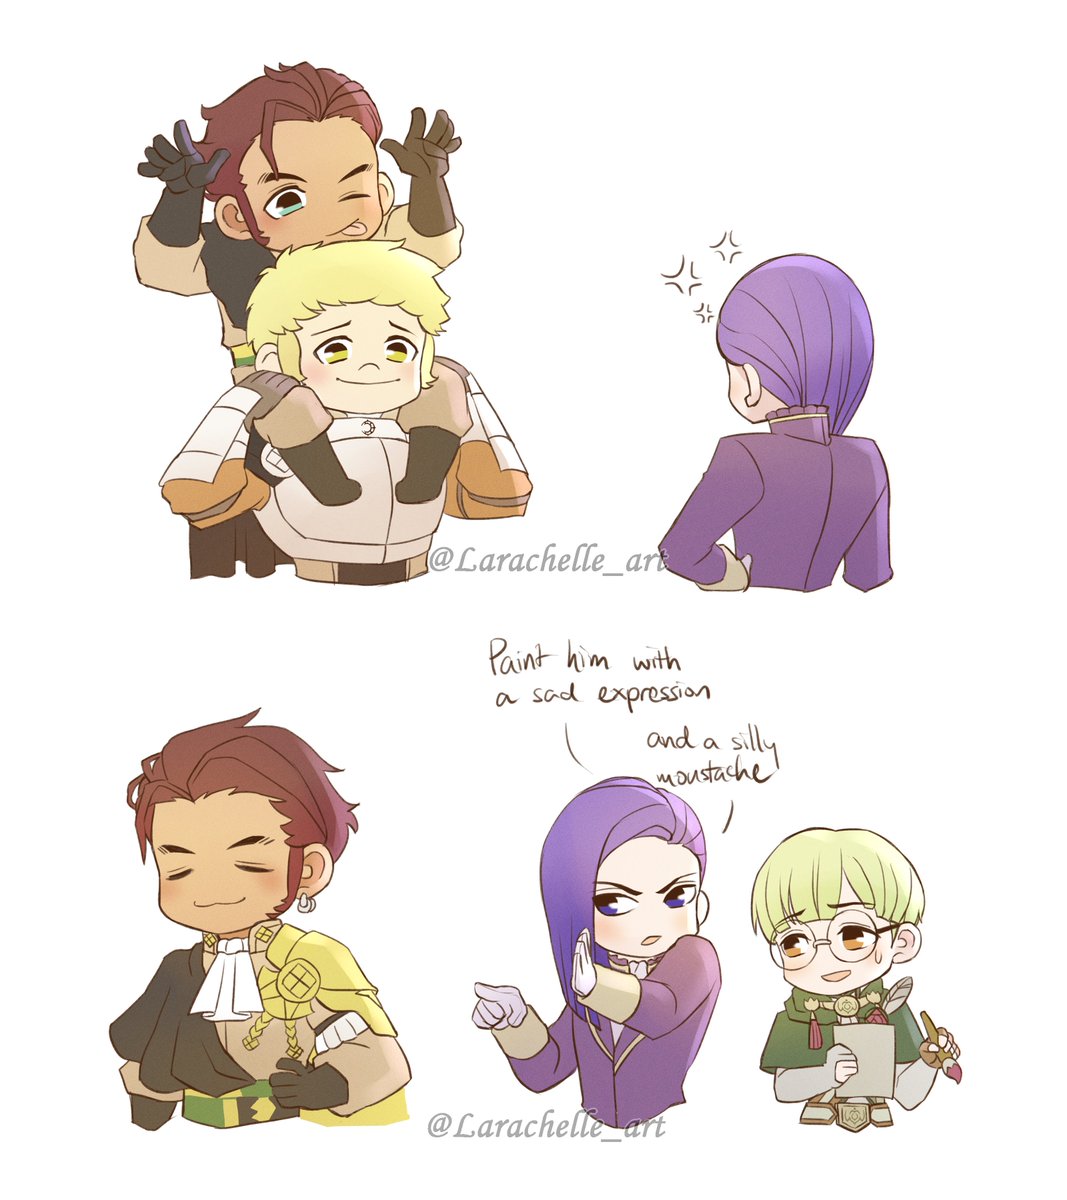 Just some silly doodles of Ignatz and Raphael's knightly adventures...

#FE3H #GoldenDeer 